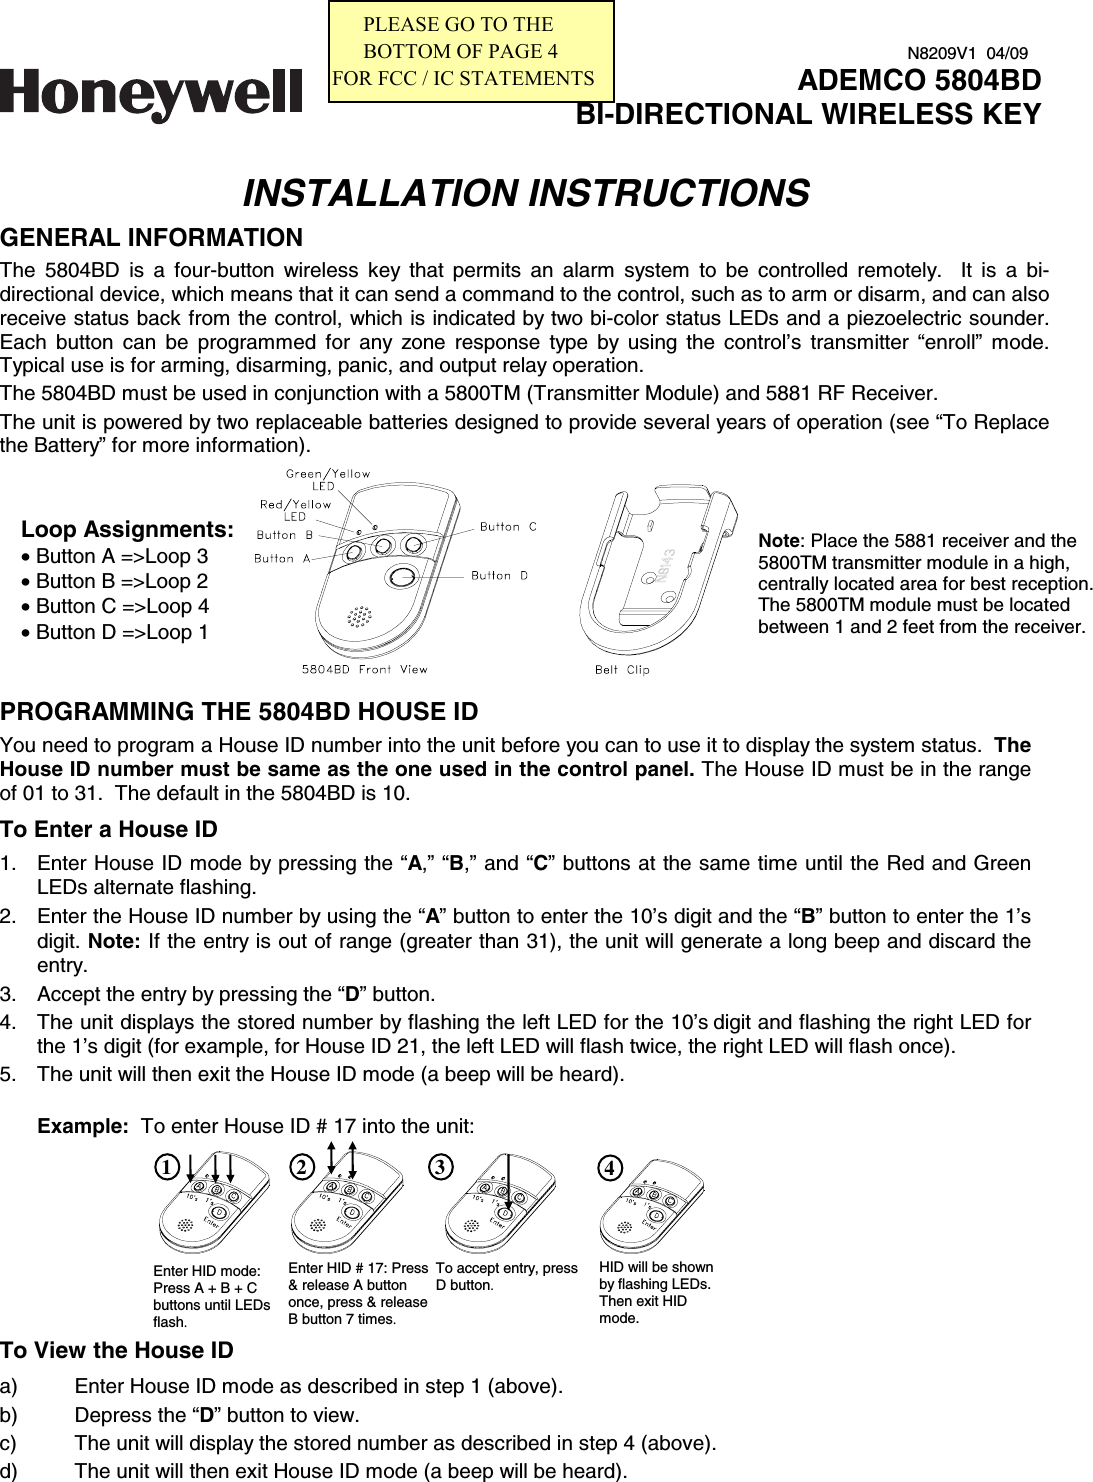    INSTALLATION INSTRUCTIONS GENERAL INFORMATION The 5804BD is a four-button wireless key that permits an alarm system to be controlled remotely.  It is a bi-directional device, which means that it can send a command to the control, such as to arm or disarm, and can also receive status back from the control, which is indicated by two bi-color status LEDs and a piezoelectric sounder. Each button can be programmed for any zone response type by using the control’s transmitter “enroll” mode. Typical use is for arming, disarming, panic, and output relay operation. The 5804BD must be used in conjunction with a 5800TM (Transmitter Module) and 5881 RF Receiver.  The unit is powered by two replaceable batteries designed to provide several years of operation (see “To Replace the Battery” for more information).       PROGRAMMING THE 5804BD HOUSE ID  You need to program a House ID number into the unit before you can to use it to display the system status.  The House ID number must be same as the one used in the control panel. The House ID must be in the range of 01 to 31.  The default in the 5804BD is 10.  To Enter a House ID 1.  Enter House ID mode by pressing the “A,” “B,” and “C” buttons at the same time until the Red and Green LEDs alternate flashing.  2.  Enter the House ID number by using the “A” button to enter the 10’s digit and the “B” button to enter the 1’s digit. Note: If the entry is out of range (greater than 31), the unit will generate a long beep and discard the entry. 3.  Accept the entry by pressing the “D” button. 4.  The unit displays the stored number by flashing the left LED for the 10’s digit and flashing the right LED for the 1’s digit (for example, for House ID 21, the left LED will flash twice, the right LED will flash once). 5.  The unit will then exit the House ID mode (a beep will be heard).     Example:  To enter House ID # 17 into the unit:                               To View the House ID  a)  Enter House ID mode as described in step 1 (above).   b)  Depress the “D” button to view. c)  The unit will display the stored number as described in step 4 (above).  d)  The unit will then exit House ID mode (a beep will be heard). ADEMCO 5804BDBI-DIRECTIONAL WIRELESS KEYN8209V1  04/09Loop Assignments: • Button A =&gt;Loop 3 • Button B =&gt;Loop 2 • Button C =&gt;Loop 4 • Button D =&gt;Loop 1 Note: Place the 5881 receiver and the 5800TM transmitter module in a high, centrally located area for best reception.  The 5800TM module must be located between 1 and 2 feet from the receiver. Enter HID mode: Press A + B + C buttons until LEDs flash. Enter HID # 17: Press &amp; release A button once, press &amp; release B button 7 times.  To accept entry, press D button. 1 2 3 4 HID will be shown by flashing LEDs. Then exit HID mode.      PLEASE GO TO THE       BOTTOM OF PAGE 4FOR FCC / IC STATEMENTS